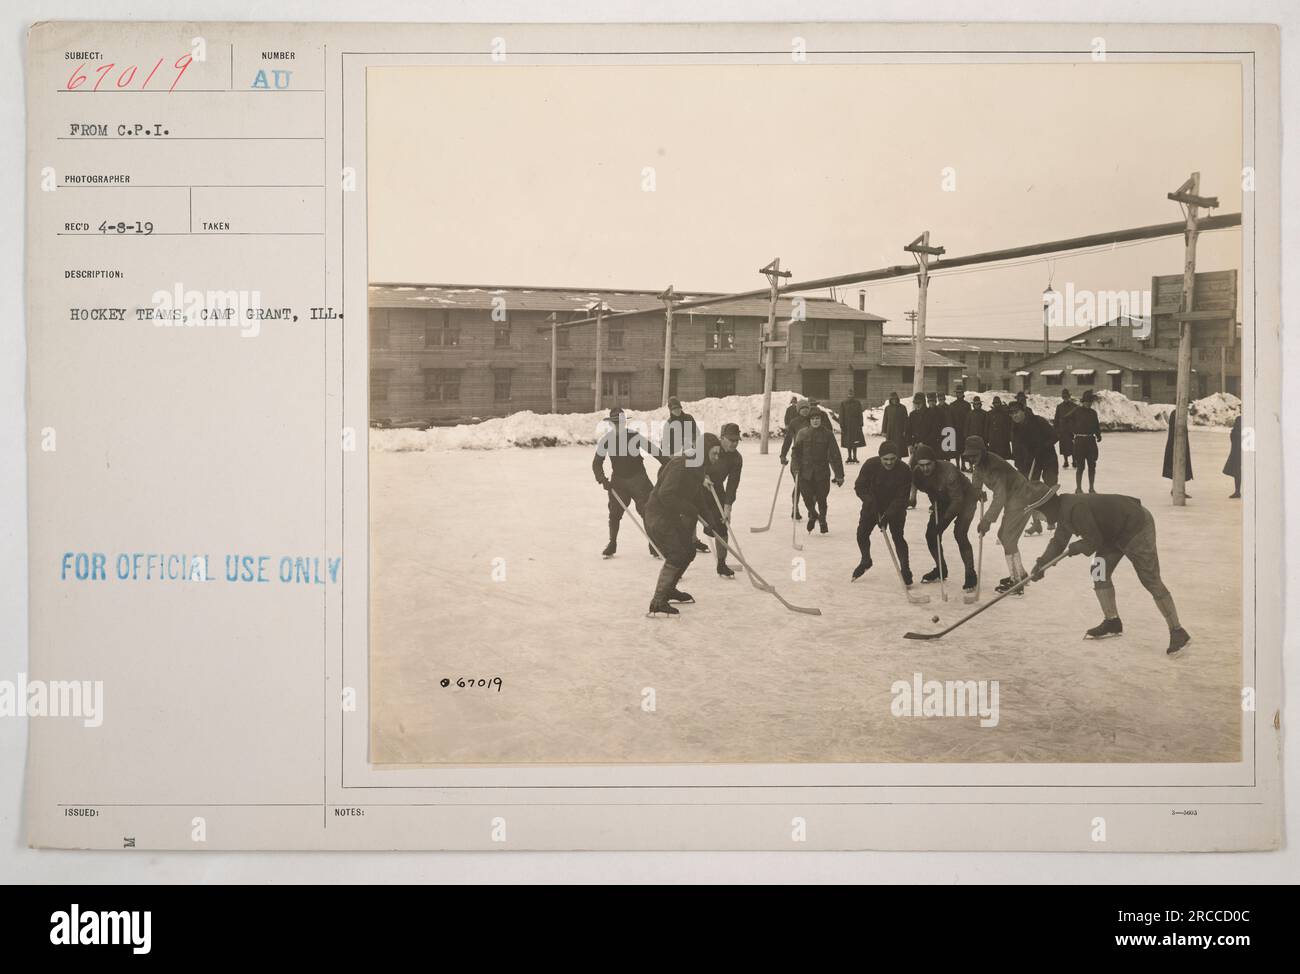 Hockey teams at Camp Grant, Illinois during World War I. The photograph was taken by a C.P.I. photographer and received on April 8, 1919. The image depicts the hockey teams, but no further details are provided in the description. The photograph is officially issued for use. Stock Photo